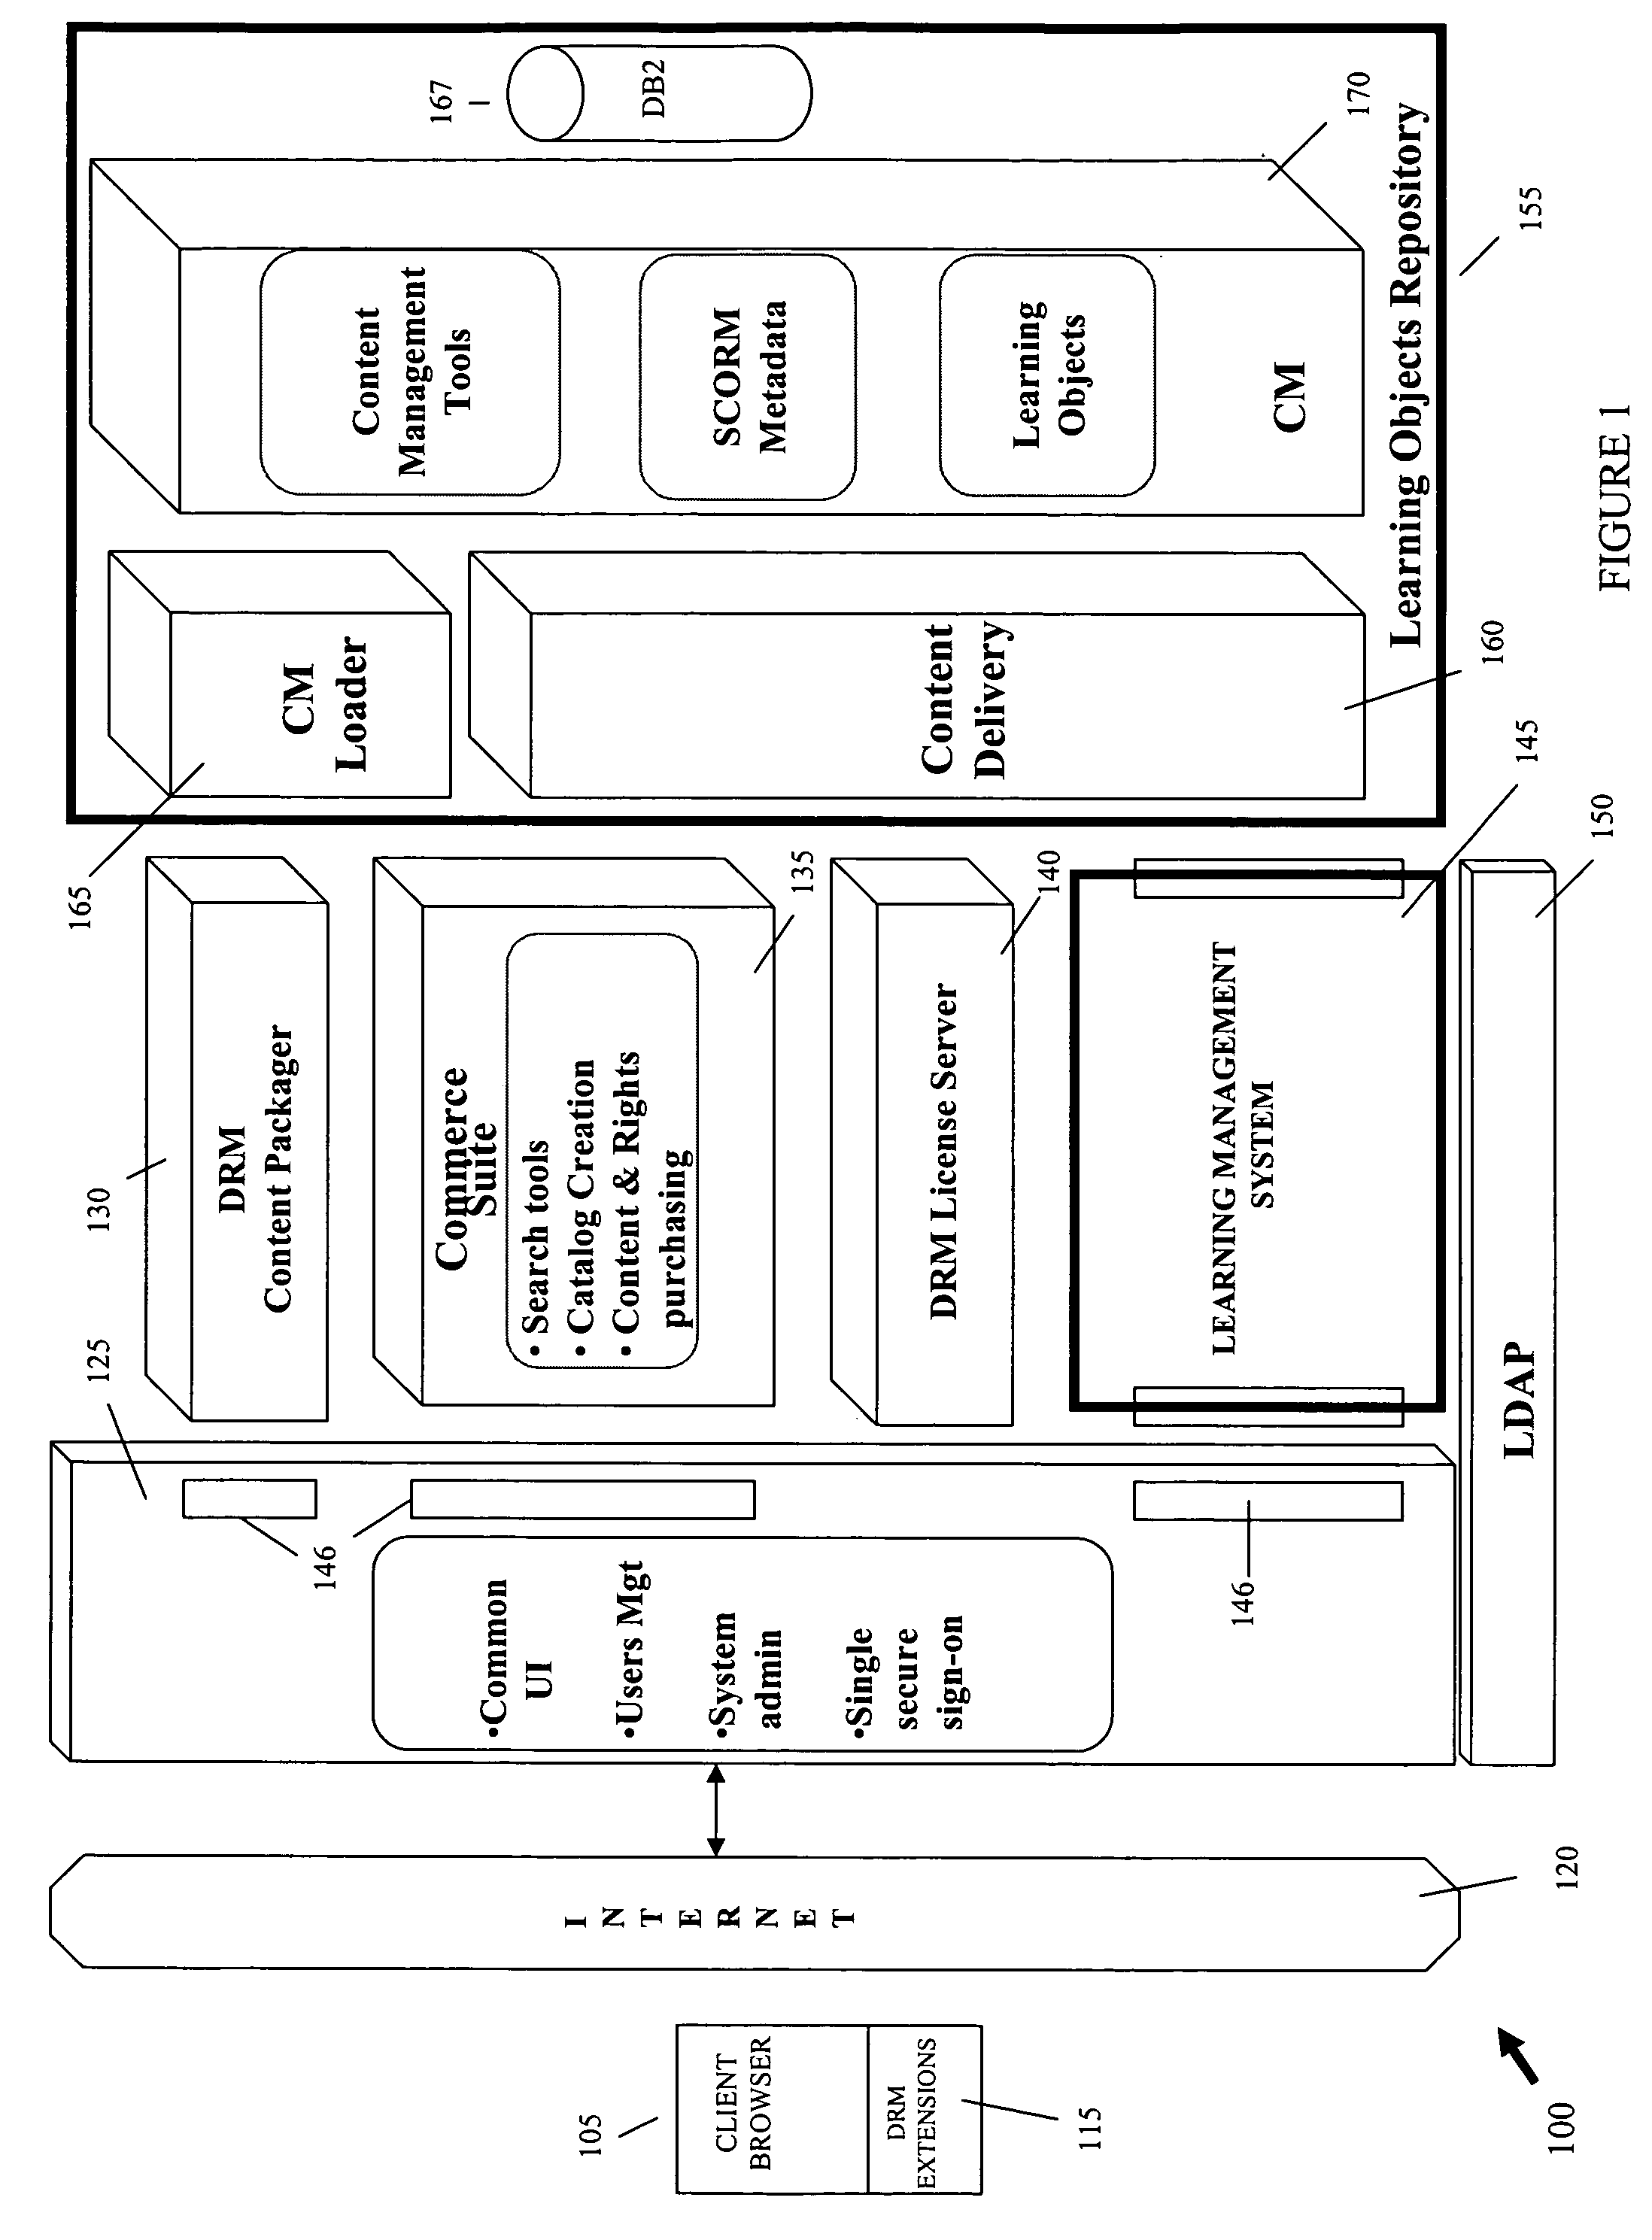 System and method for authoring learning material using digital ownership rights